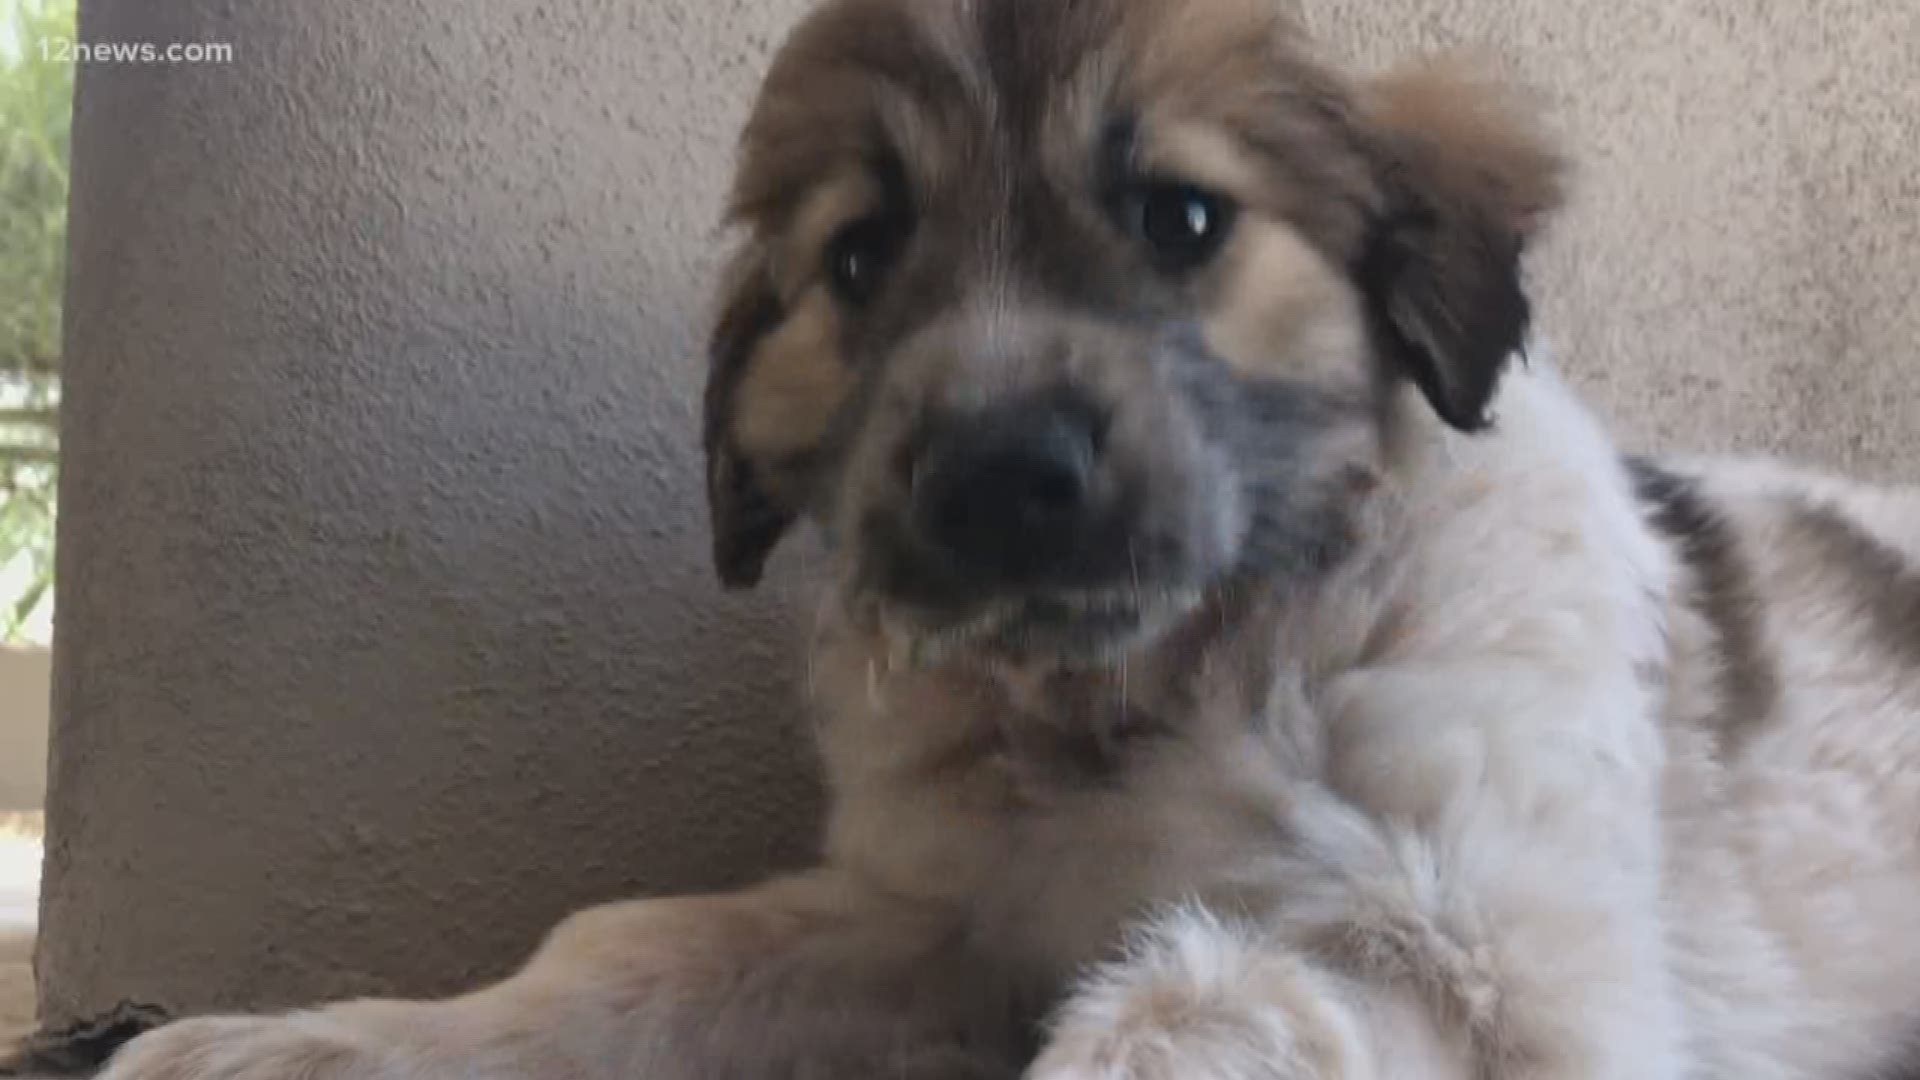 A three-month-old puppy, Latte, is lucky to be alive after an owl swooped in, picked her up, then flew nearly a mile before dropping her on a golf course. Latte is expected to make a full recovery thanks to the team at Foothills Animal Rescue.